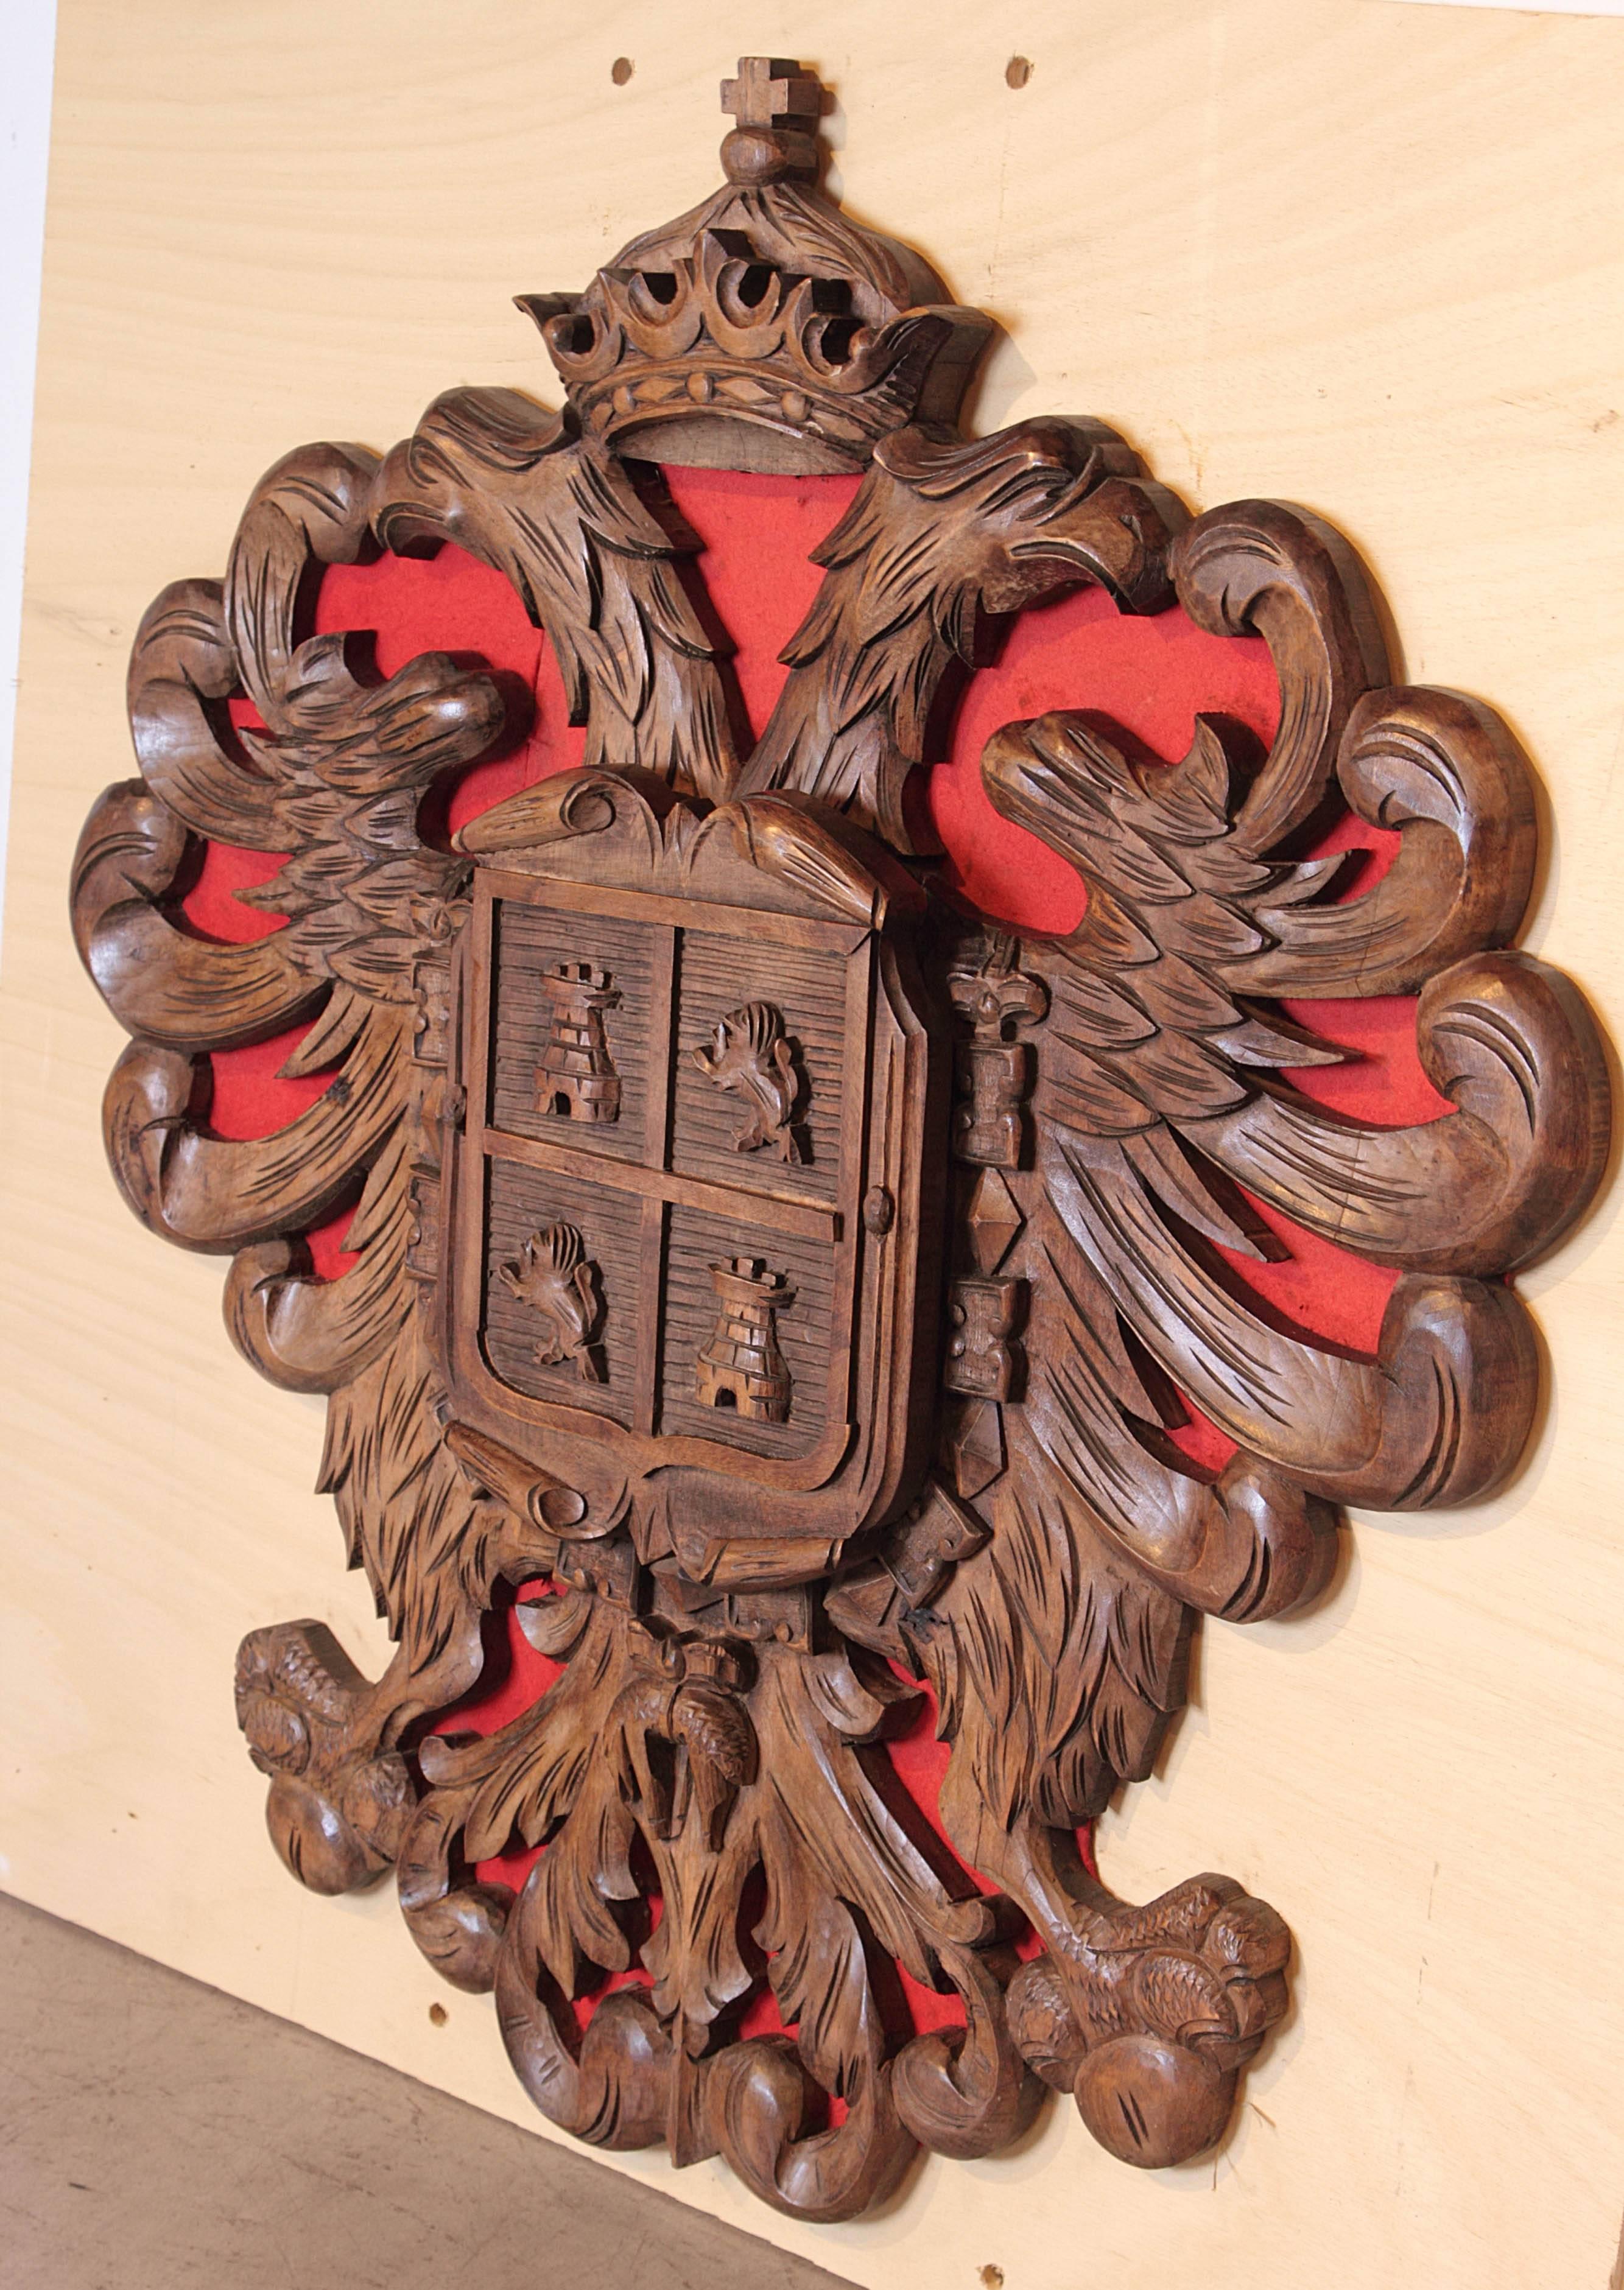 This antique oak coat of arms depicting a twin headed eagle has its roots as an emblem of the Byzantine Empire. One head is turning to Rome in the West while the other head turns to Constantinople in the East. The twin headed eagle can be found on